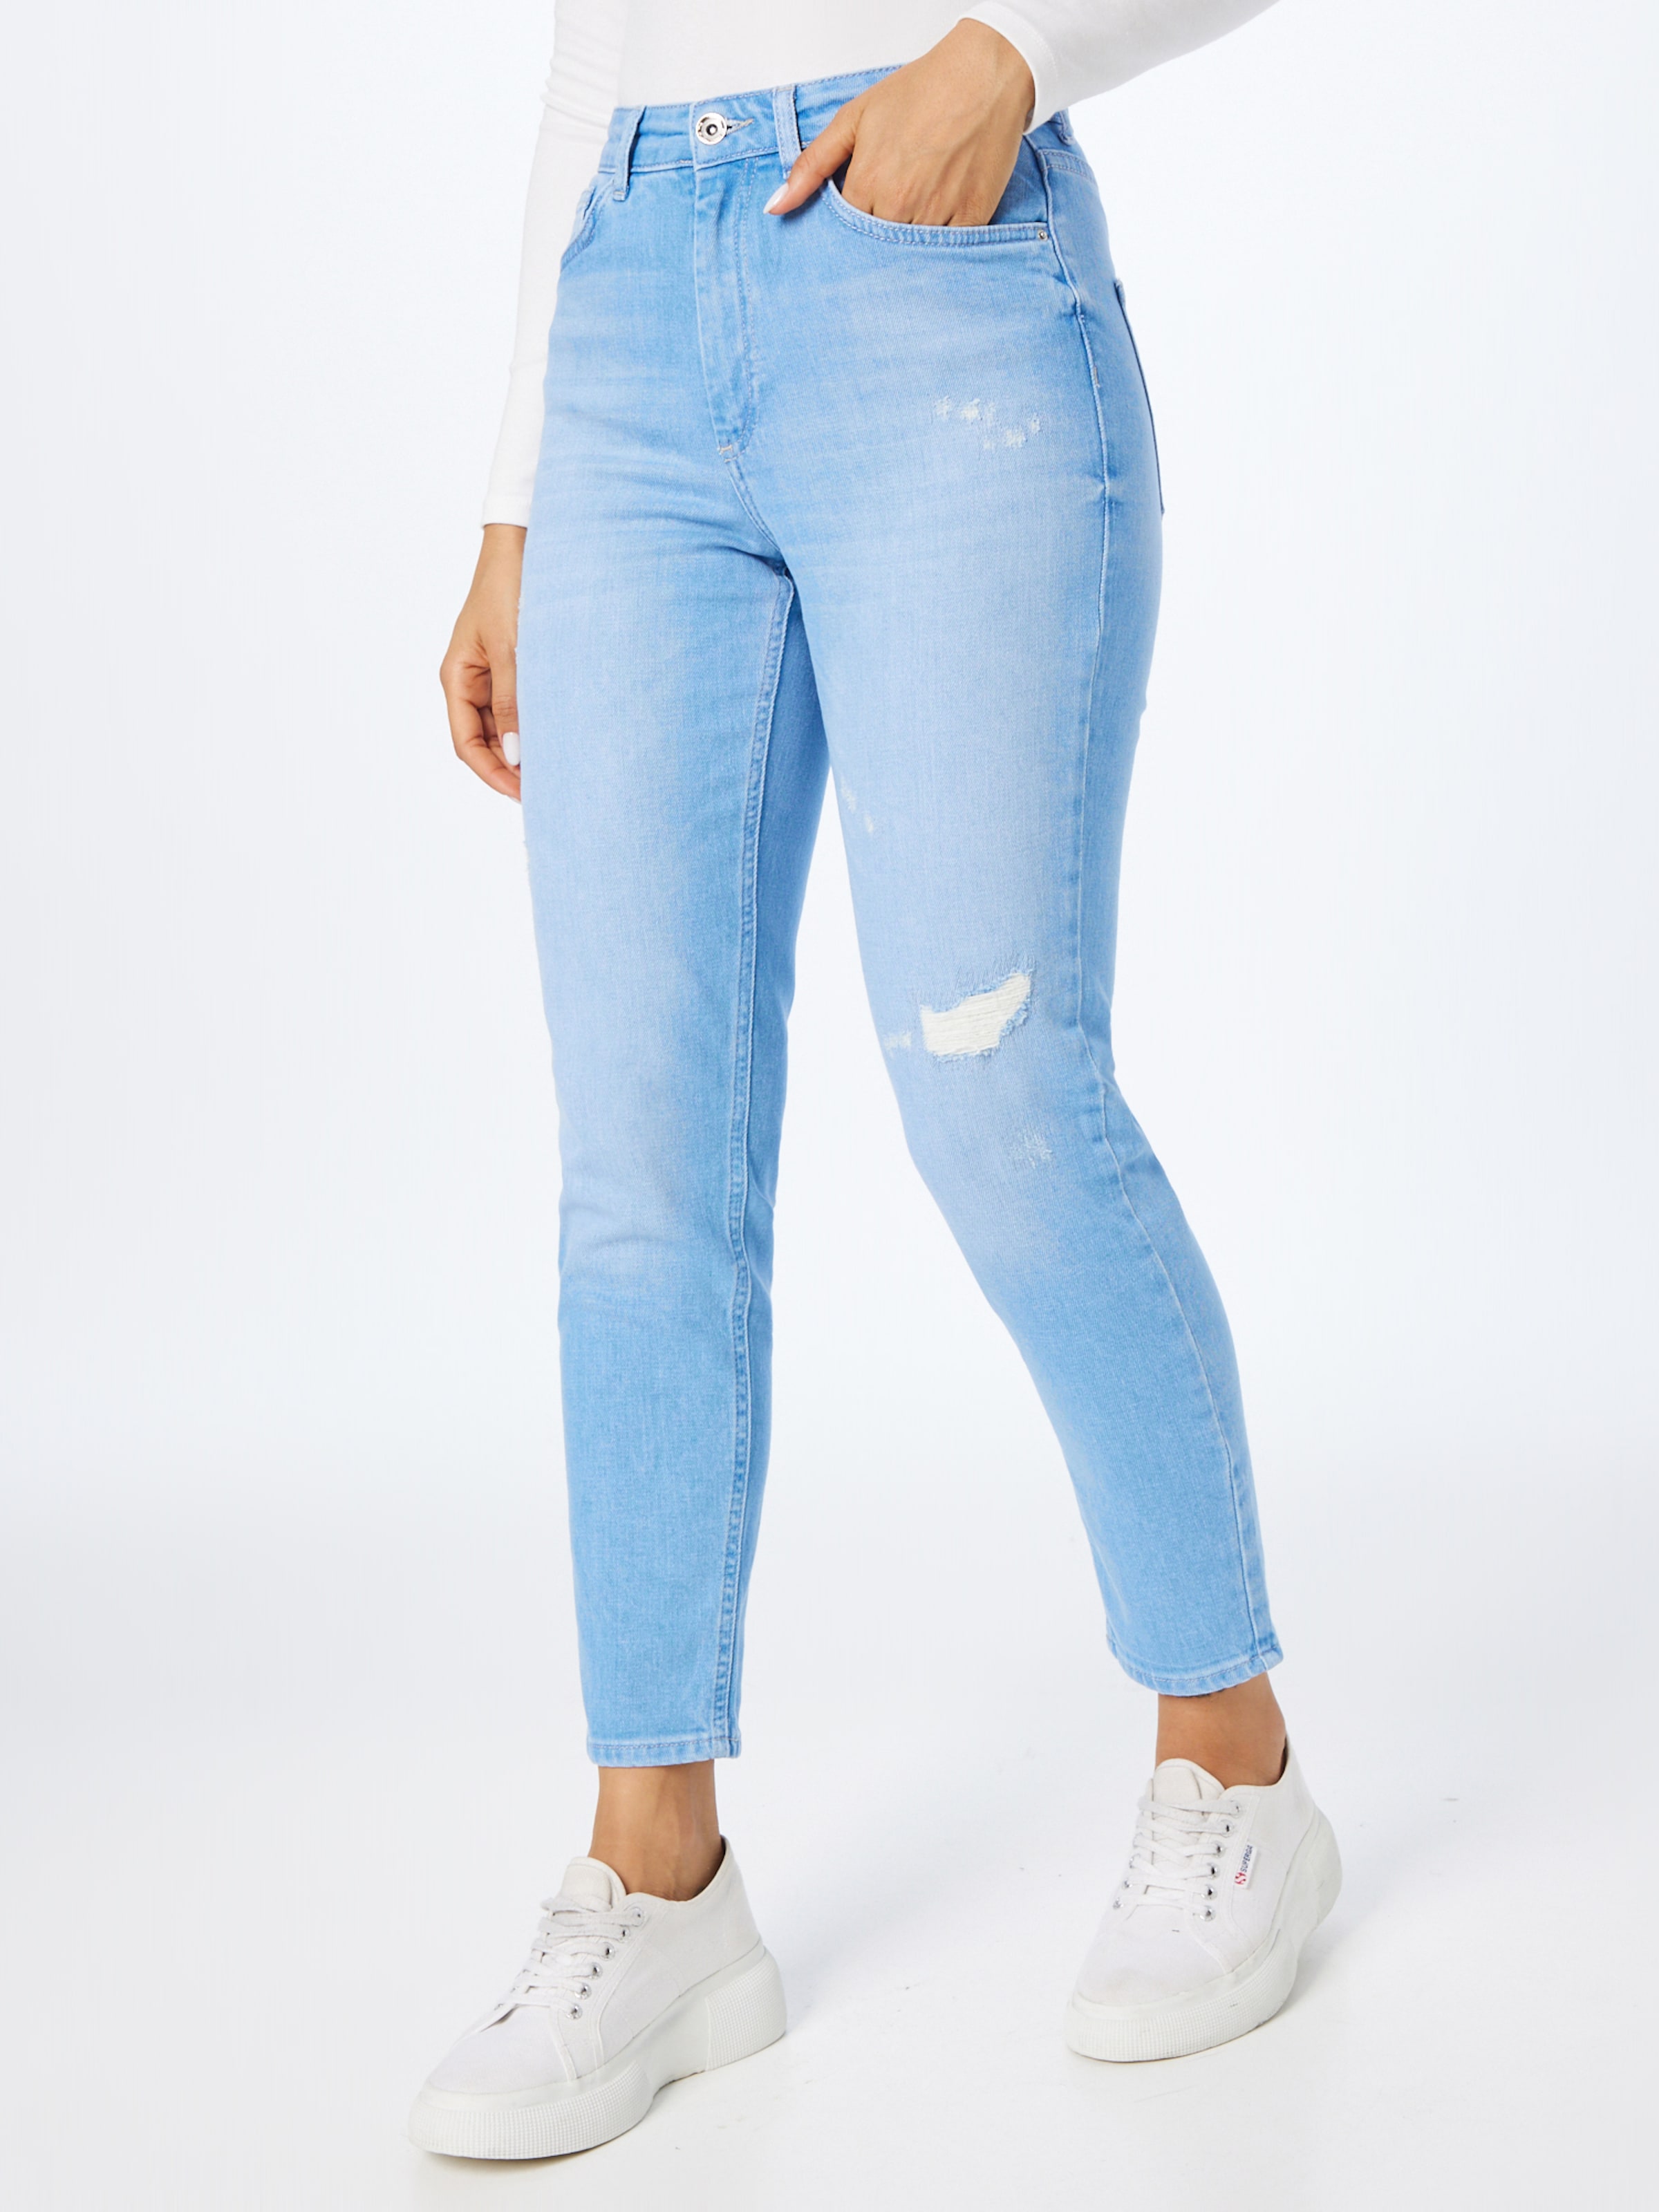 Womens Jeans RE/DONE Jeans Save 18% RE/DONE Denim Ripped Straight-leg Jeans in Blue 